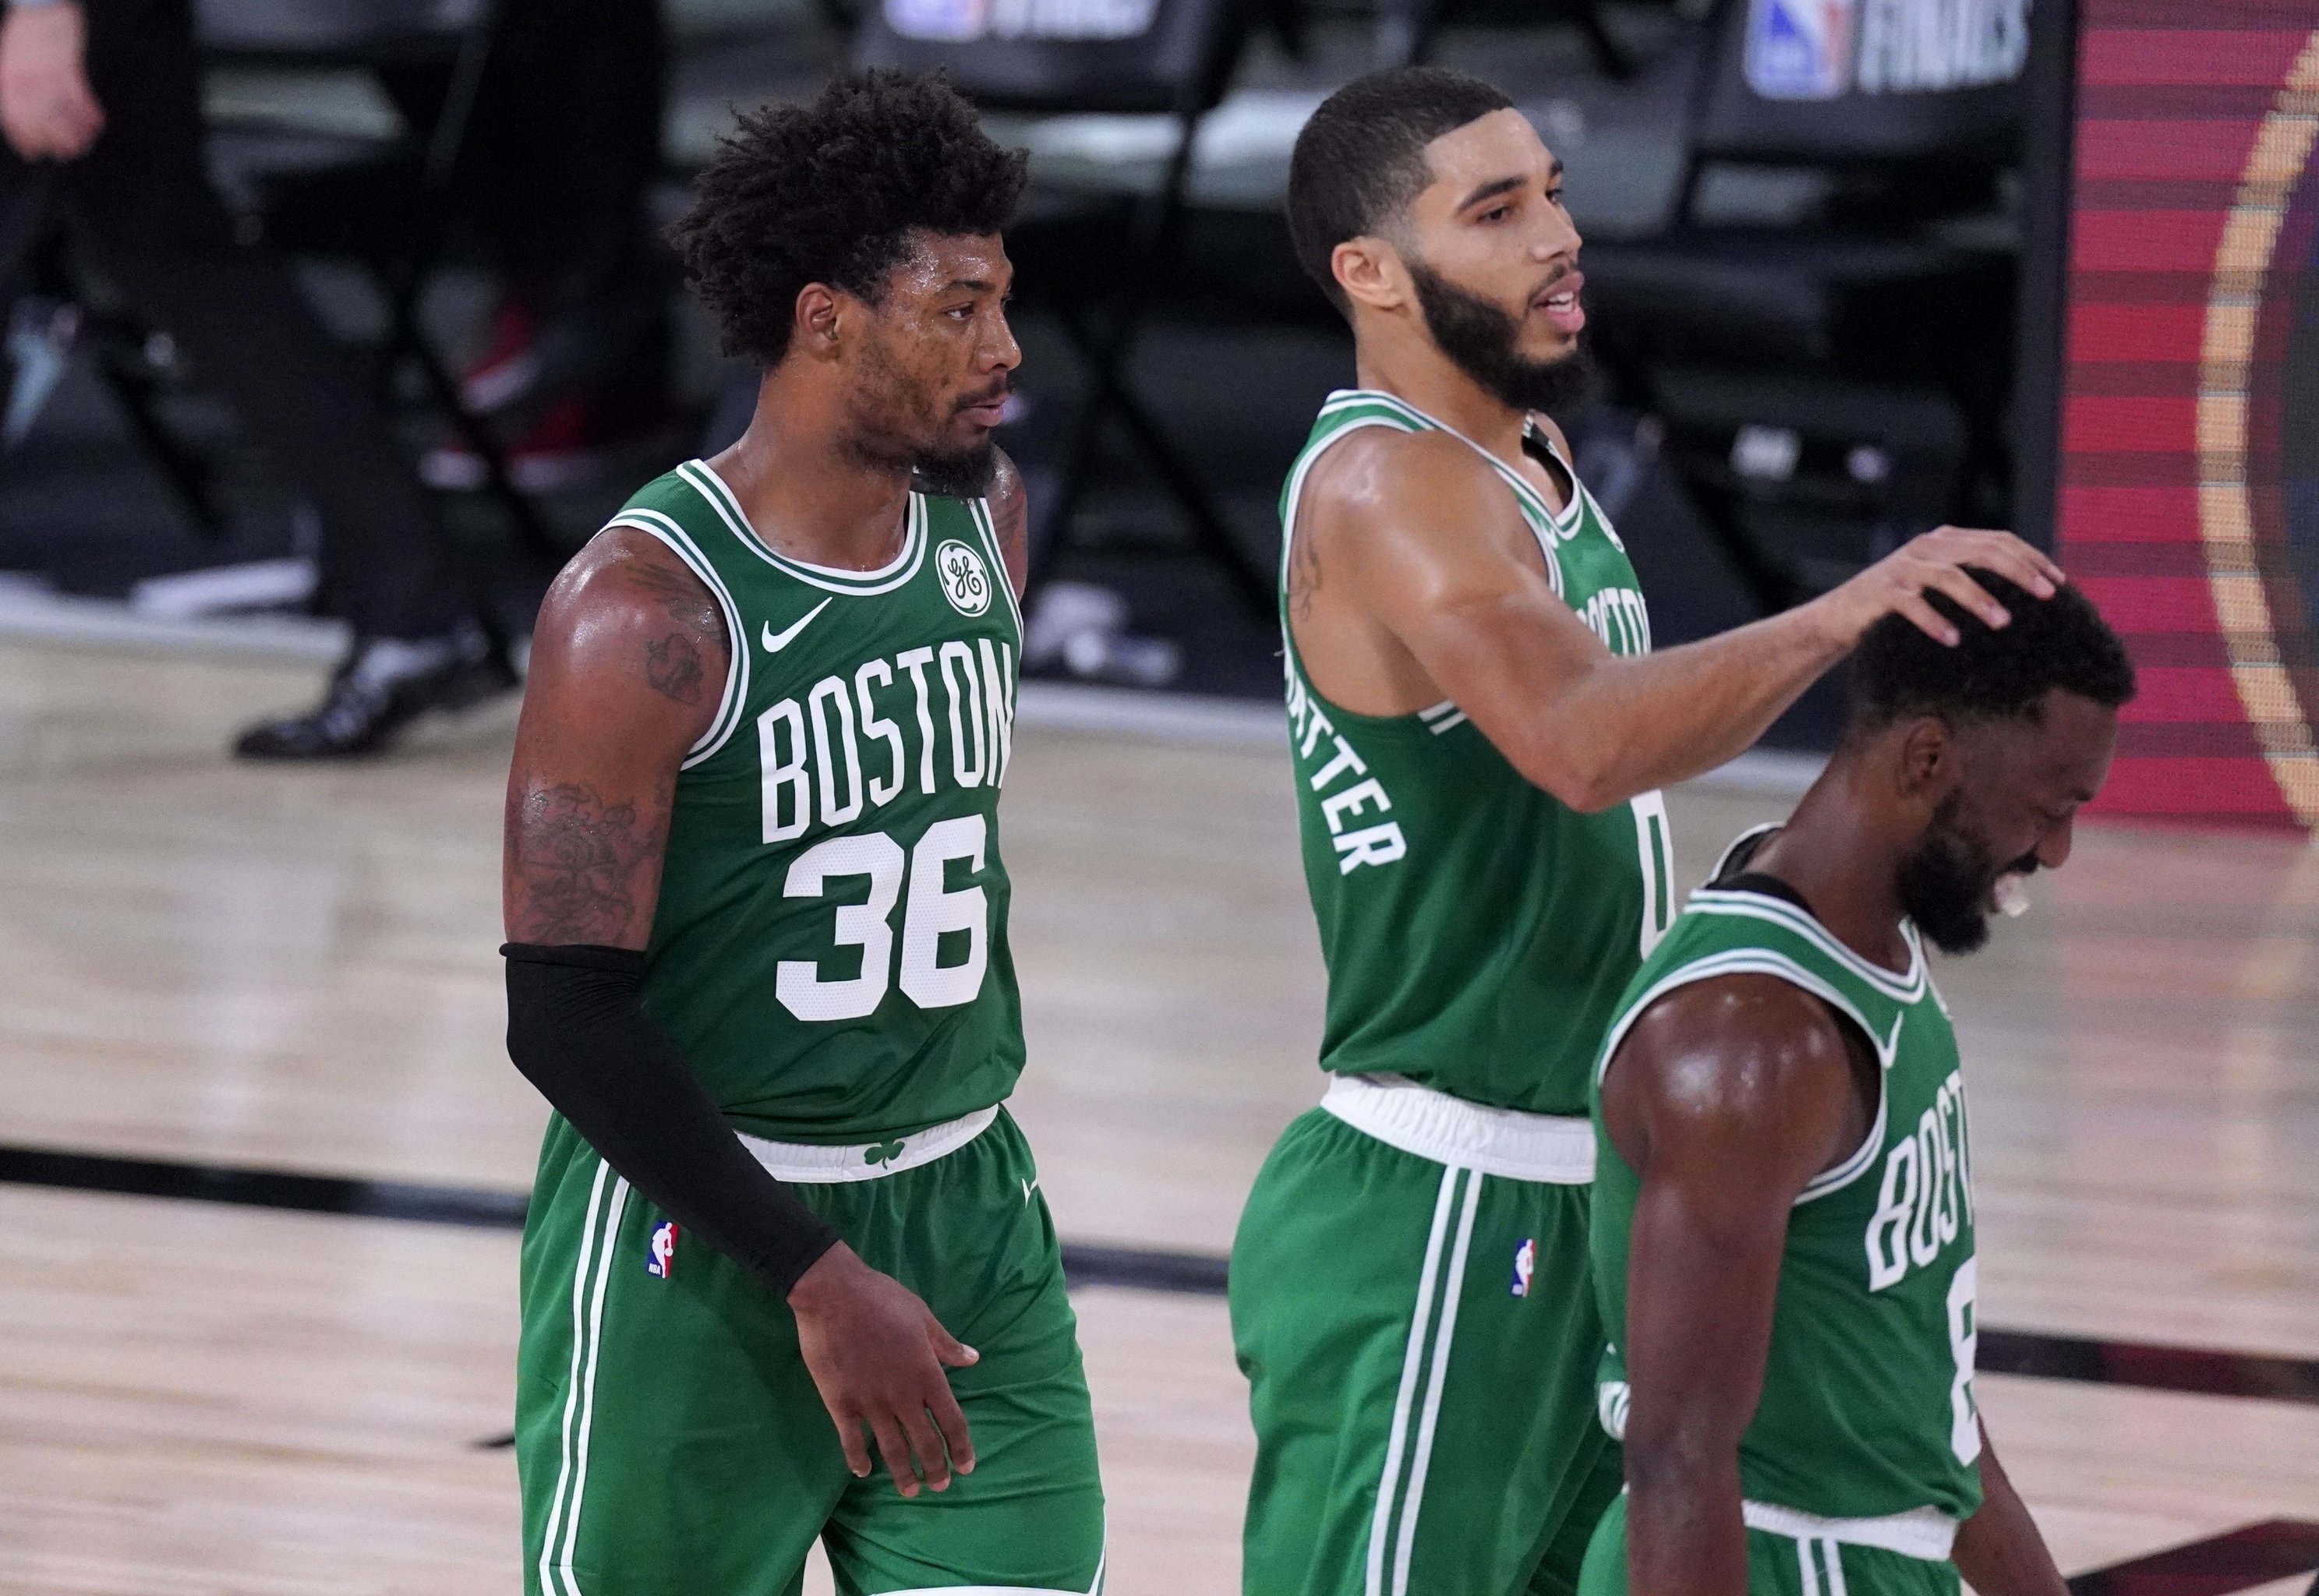 Cold Market No More: Marcus Smart Re-signs With the Celtics - The